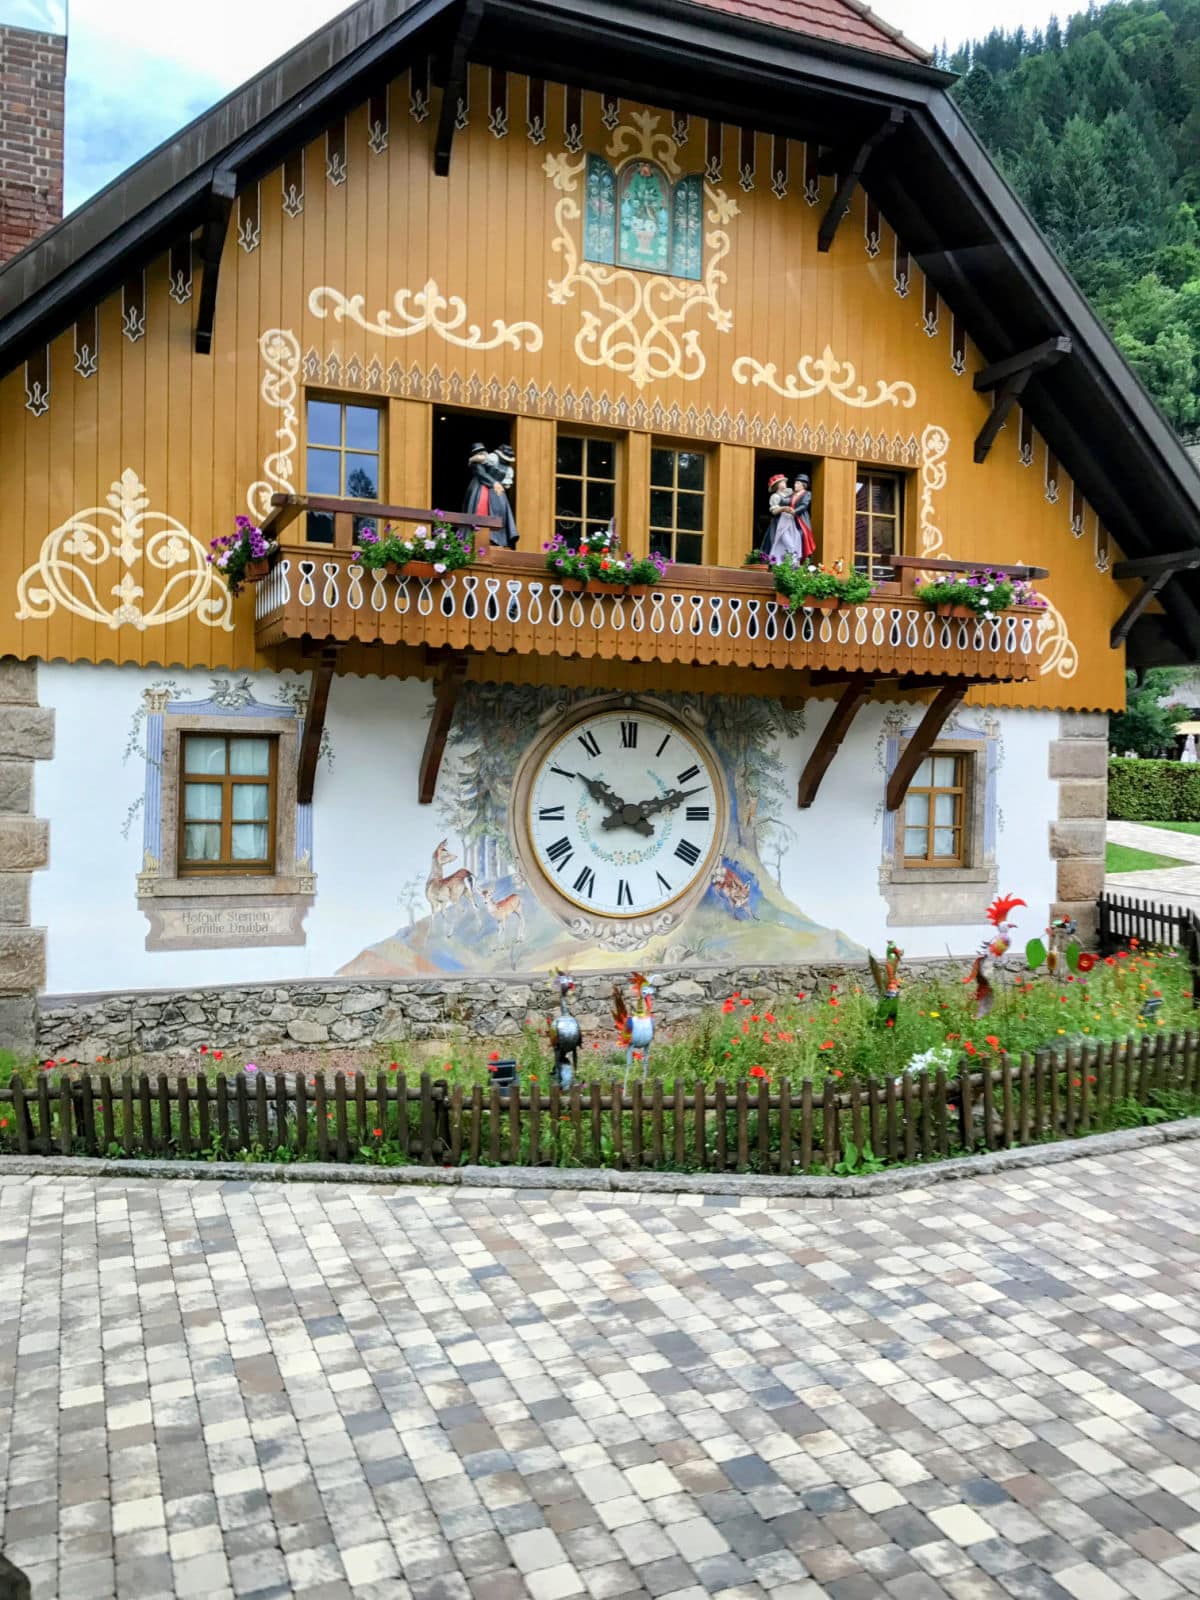 Shop in Black Forest Germany.